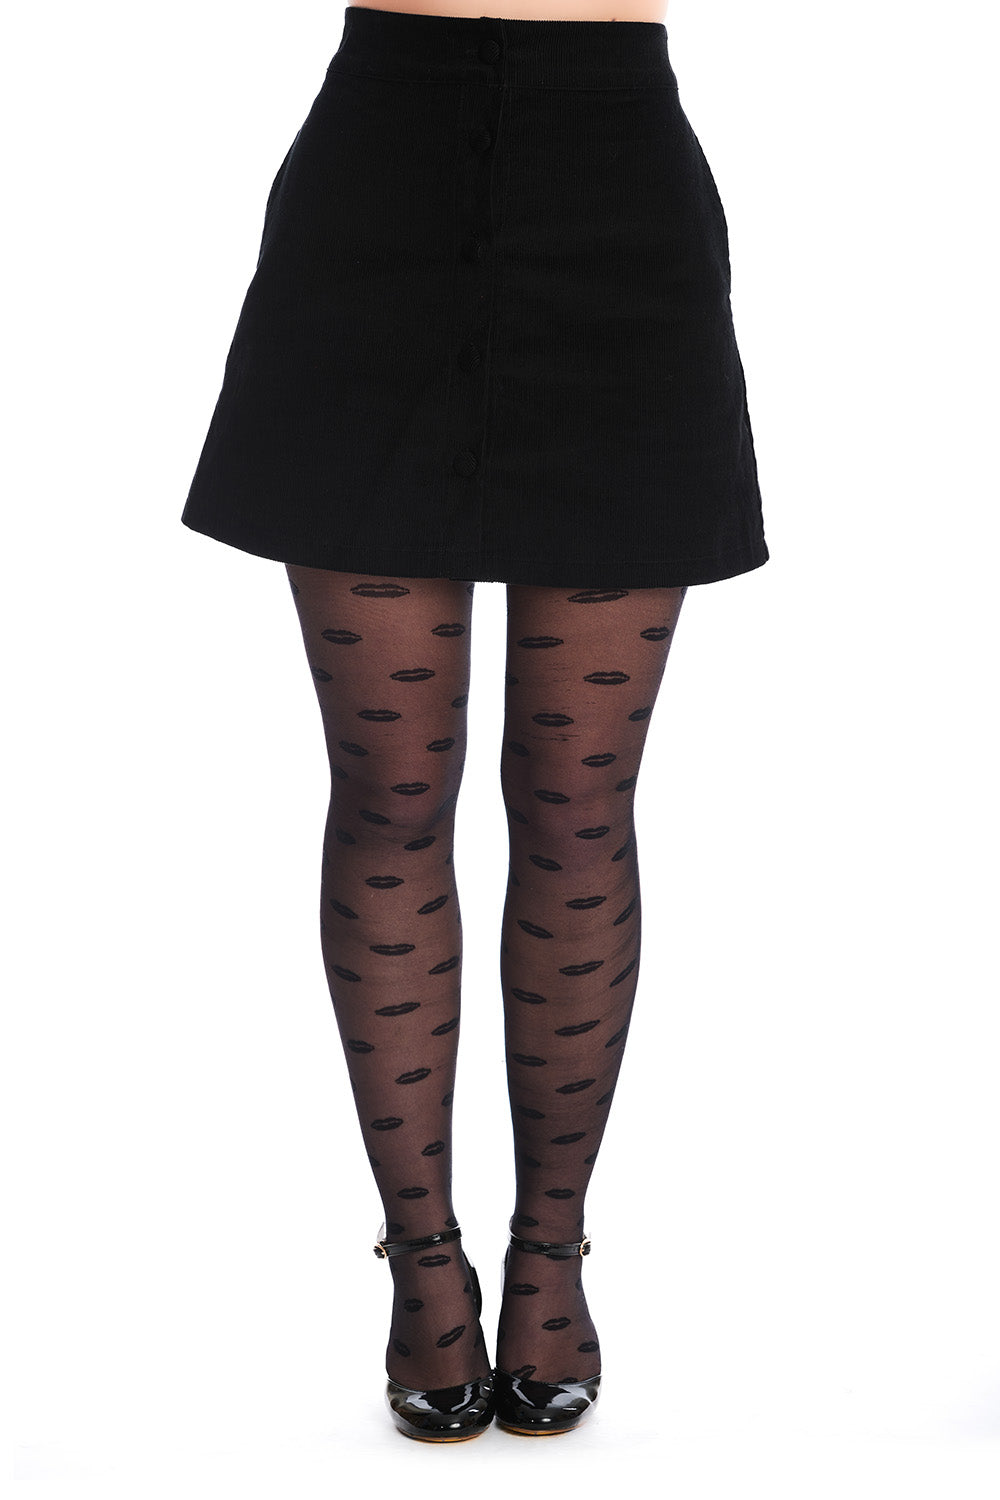 black corduroy button-front full a-line skirt in a above the knee length with side seam pockets. Shown on a model wearing patterned tights from the front